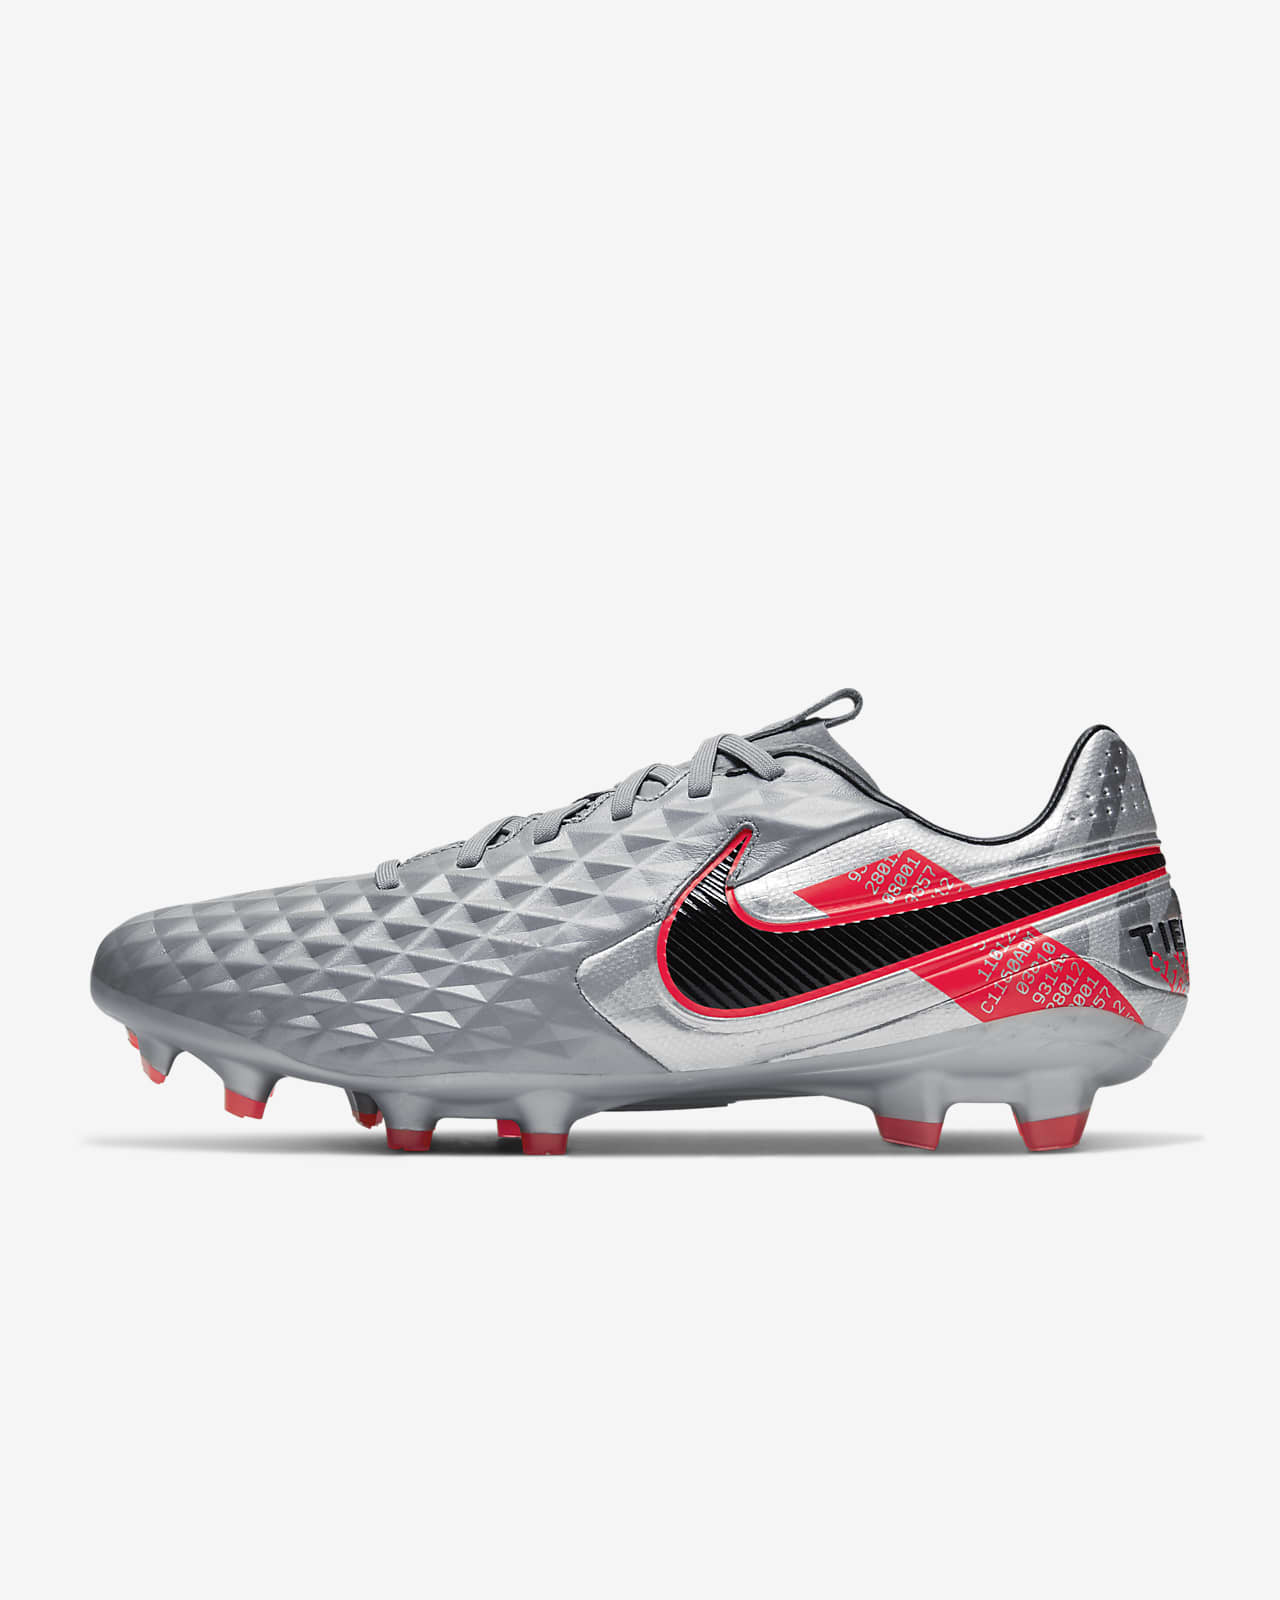 Nike Tiempo Legend 8 Pro FG Firm-Ground Football Boot. Nike AT